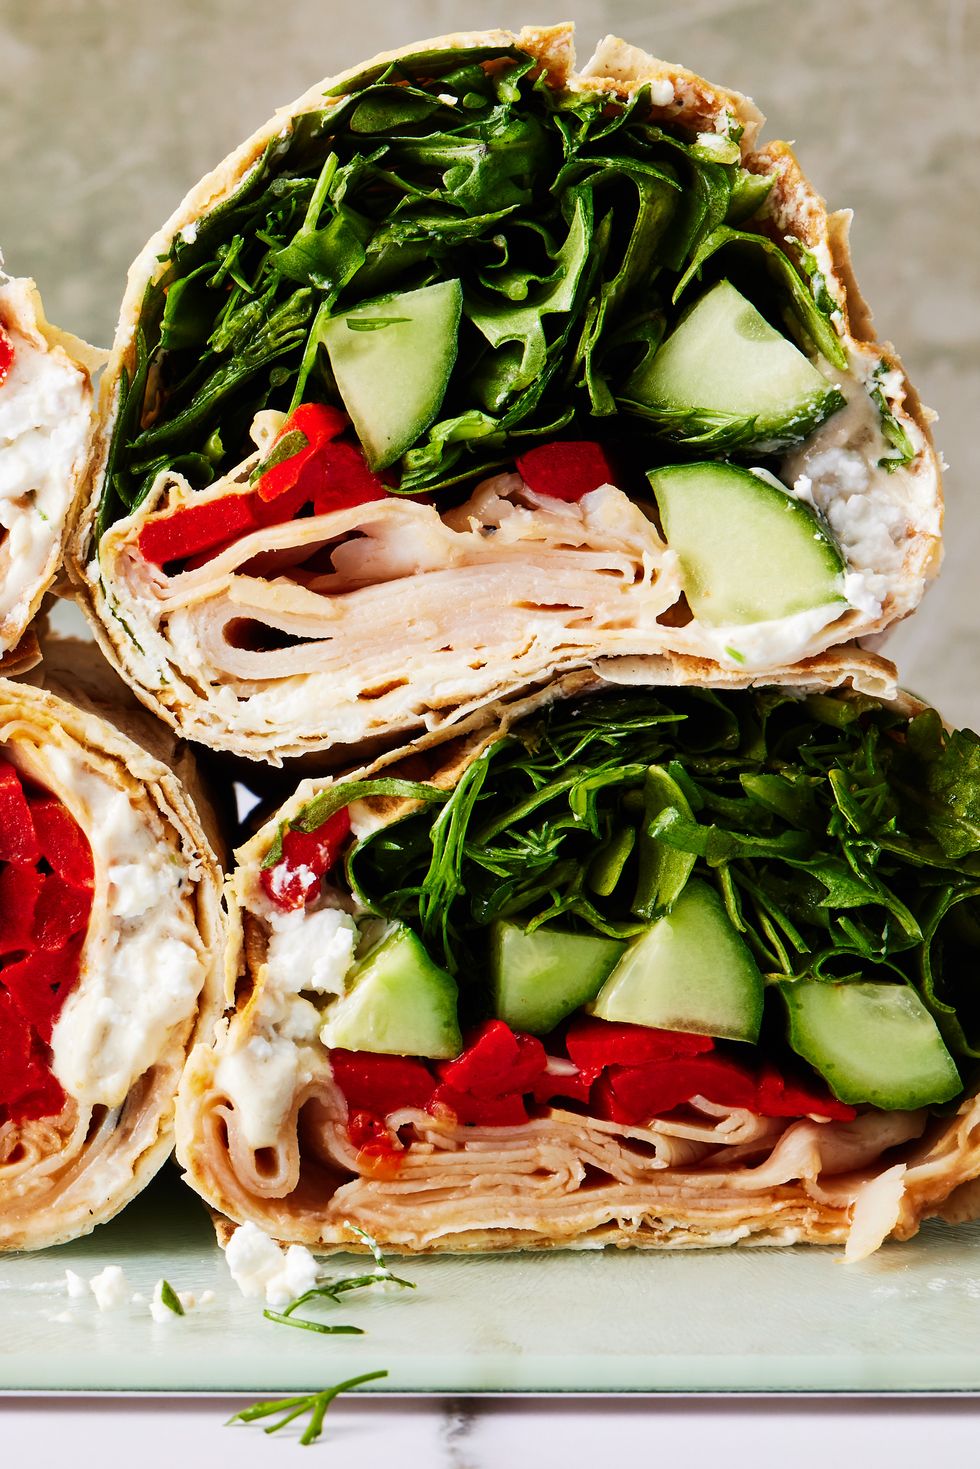 tortilla wrap with turkey, spinach, cucumbers, and red peppers